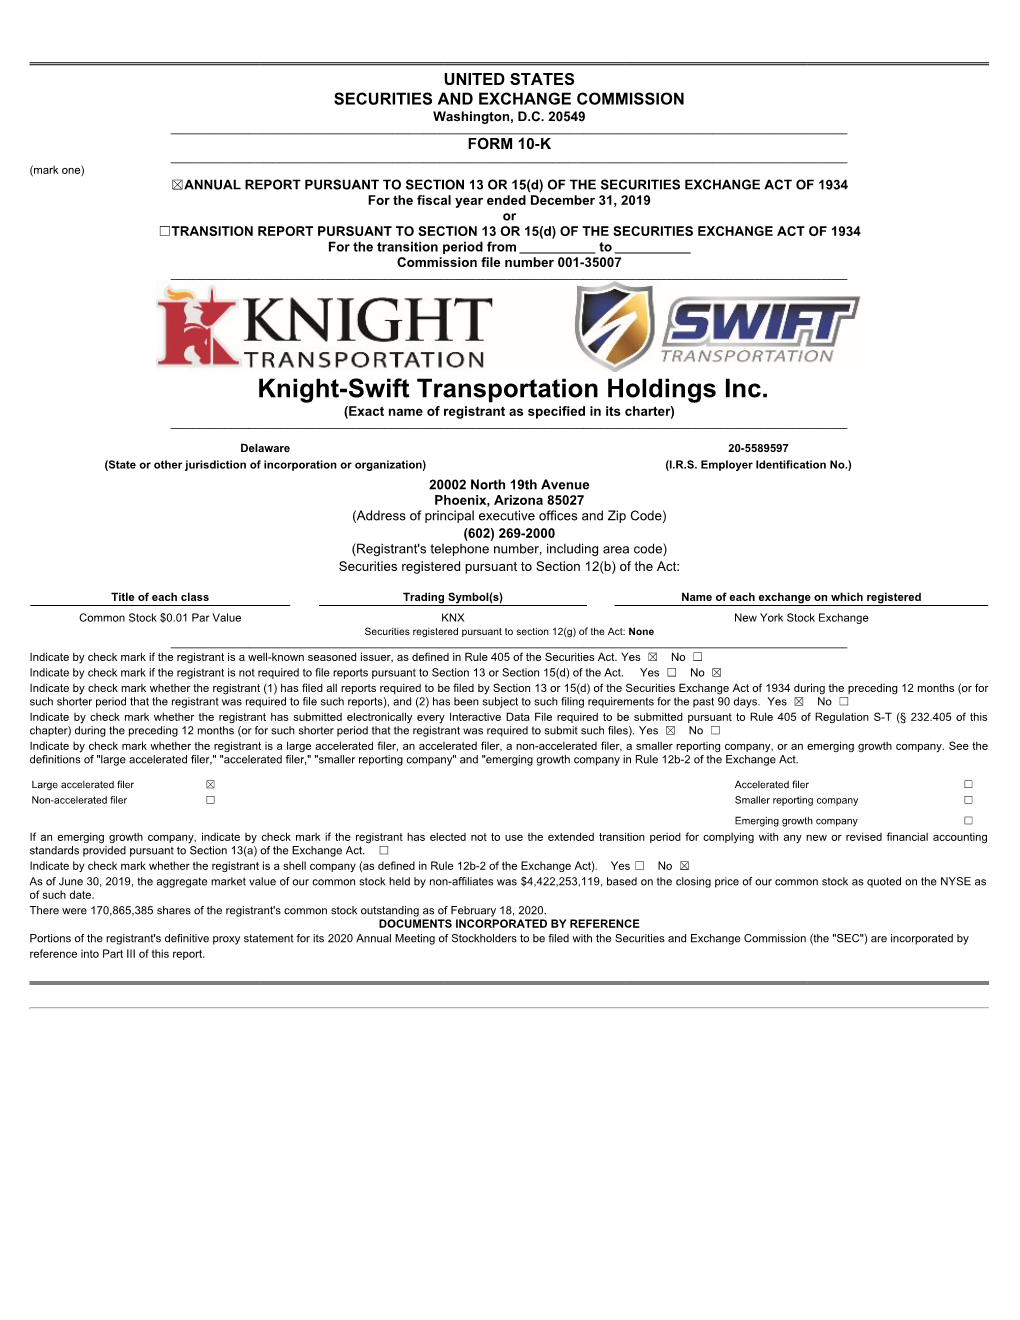 Knight-Swift Transportation Holdings Inc. (Exact Name of Registrant As Specified in Its Charter) ______